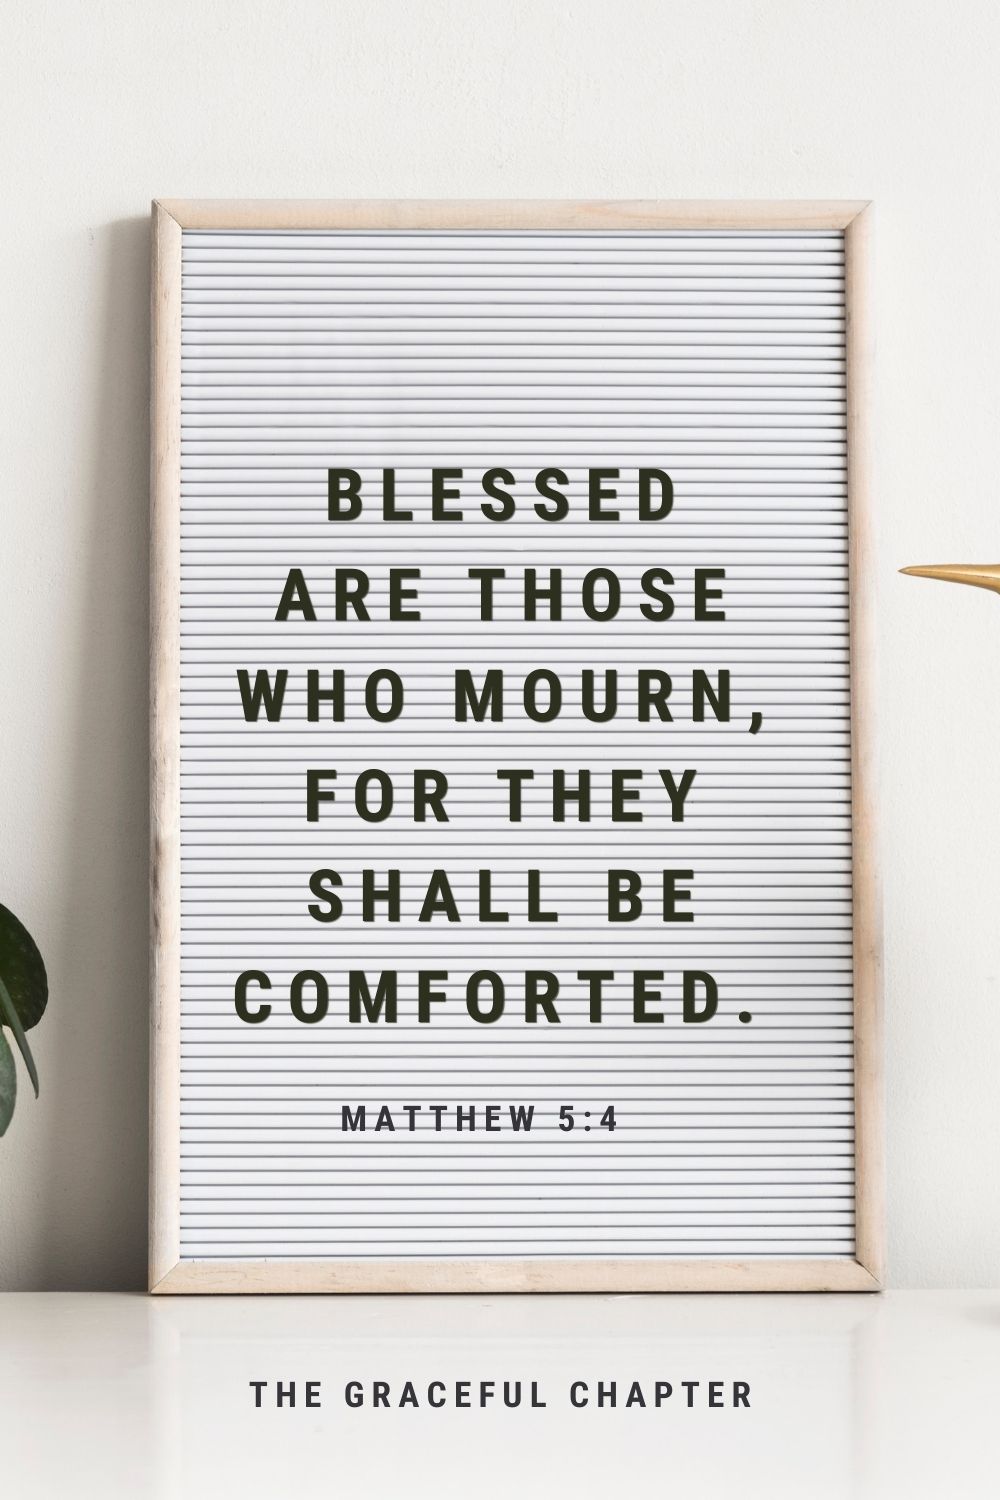 Blessed are those who mourn, For they shall be comforted.  Matthew 5:4